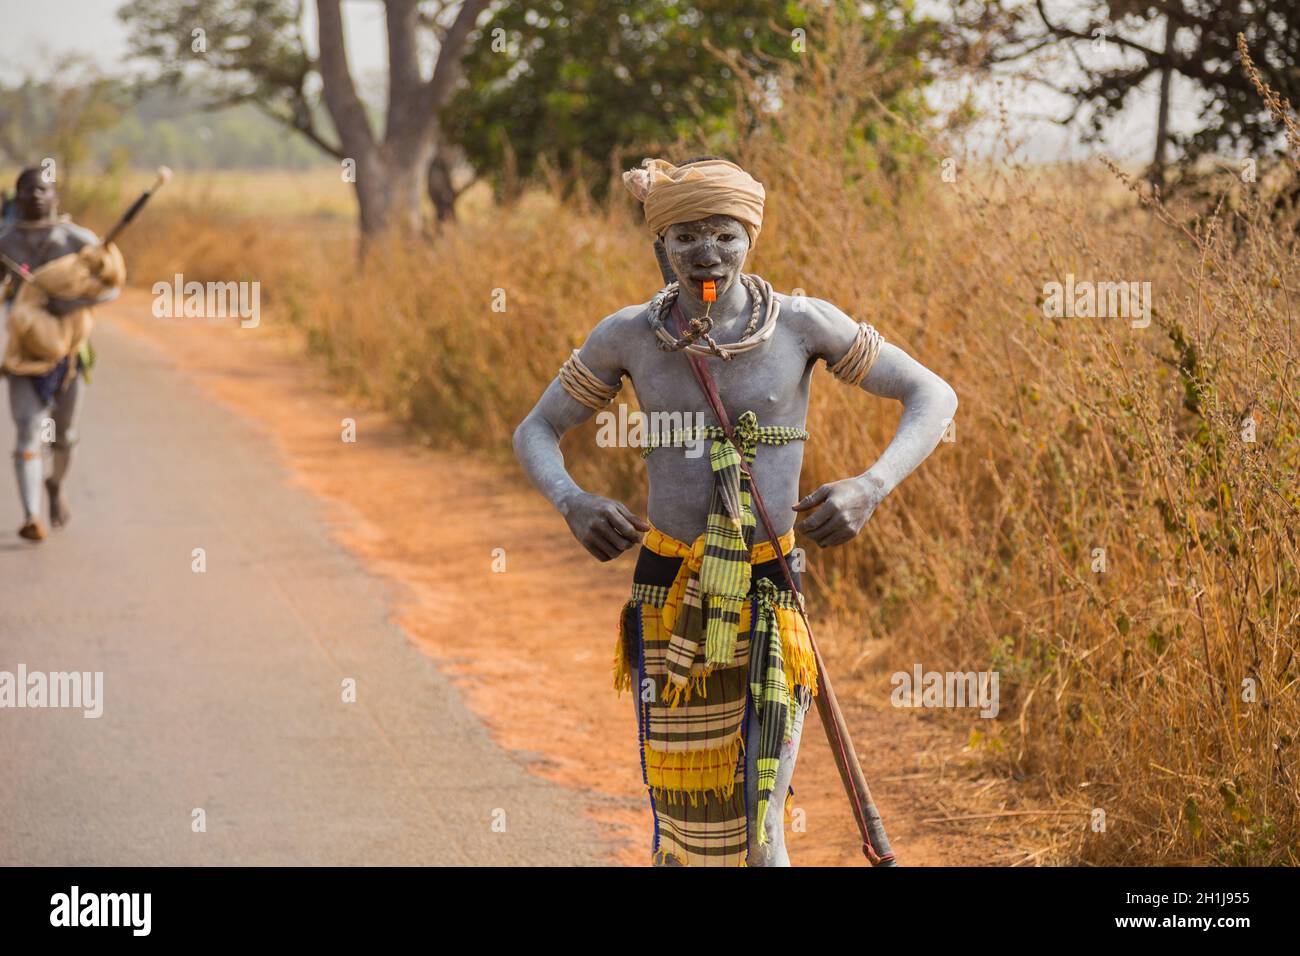 Bissau, Republic of Guinea-Bissau - January 11, 2020: Portrait of a man warrior with traditionally painted face Stock Photo